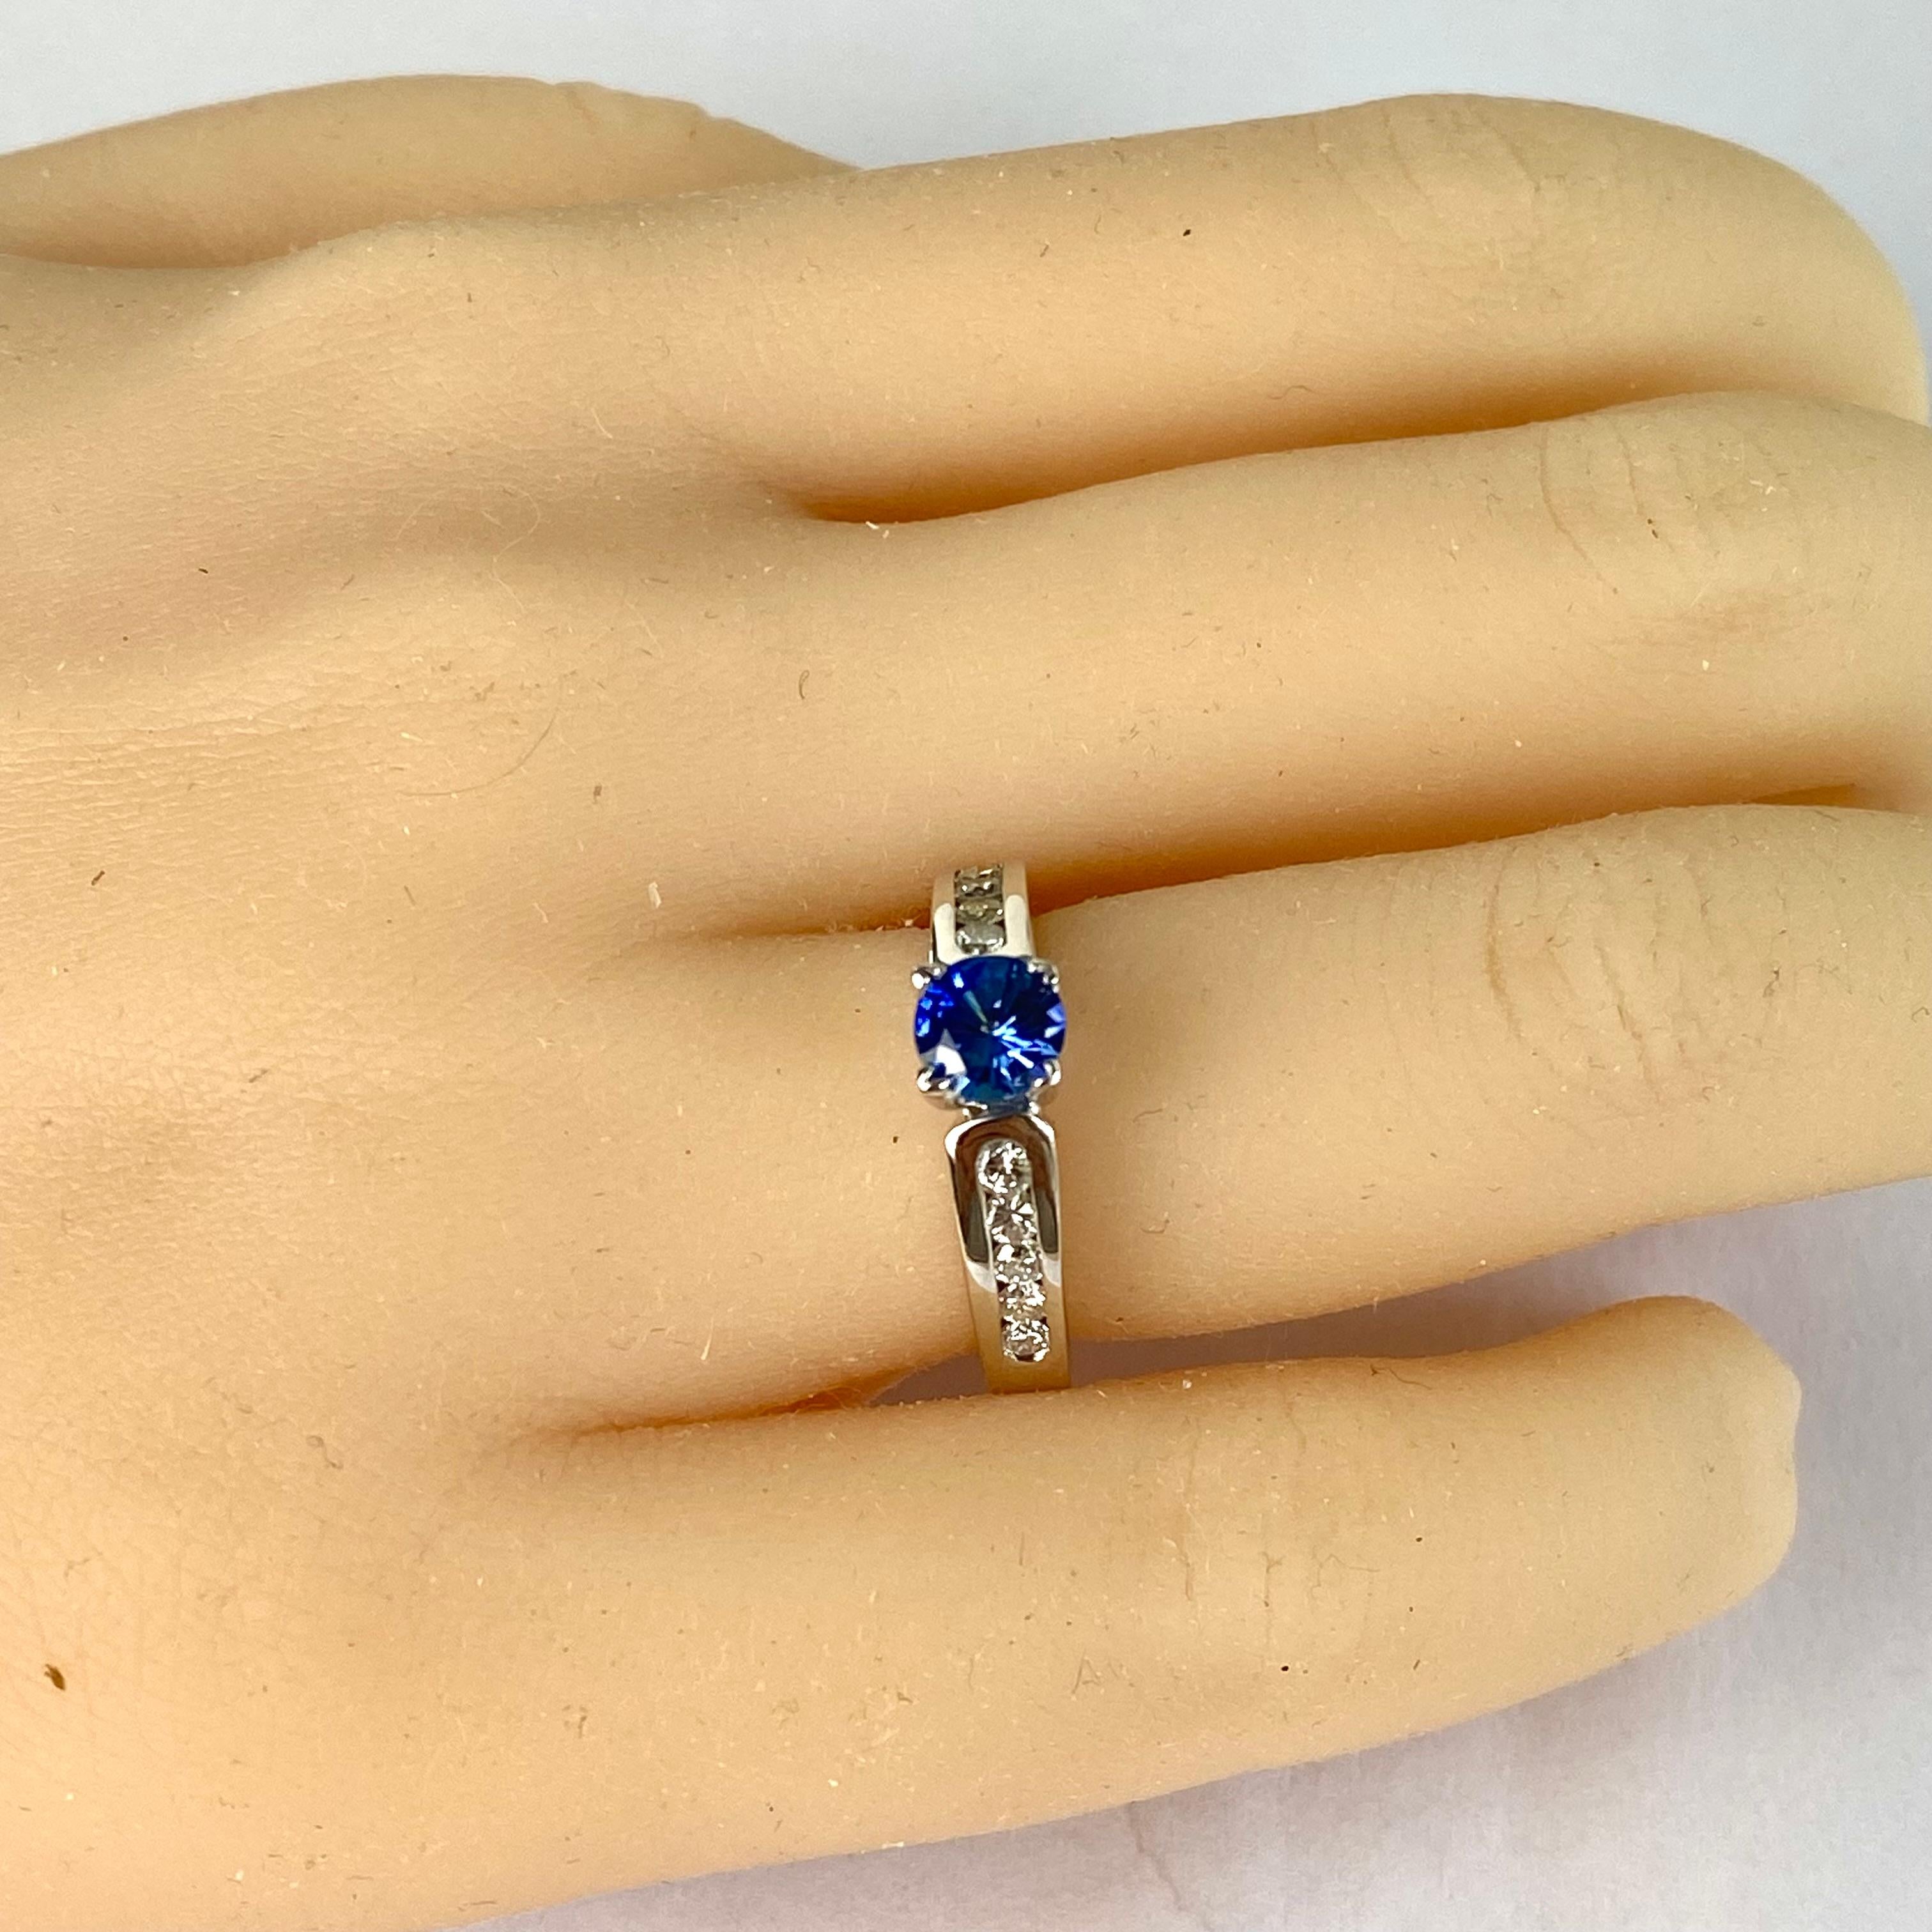 Introducing a timeless masterpiece: behold the Vintage Gabriel & Co. 18k Gold Diamond and Ceylon Sapphire Engagement Ring. This exquisite piece marries the allure of vintage design with the elegance of contemporary craftsmanship, creating a symbol